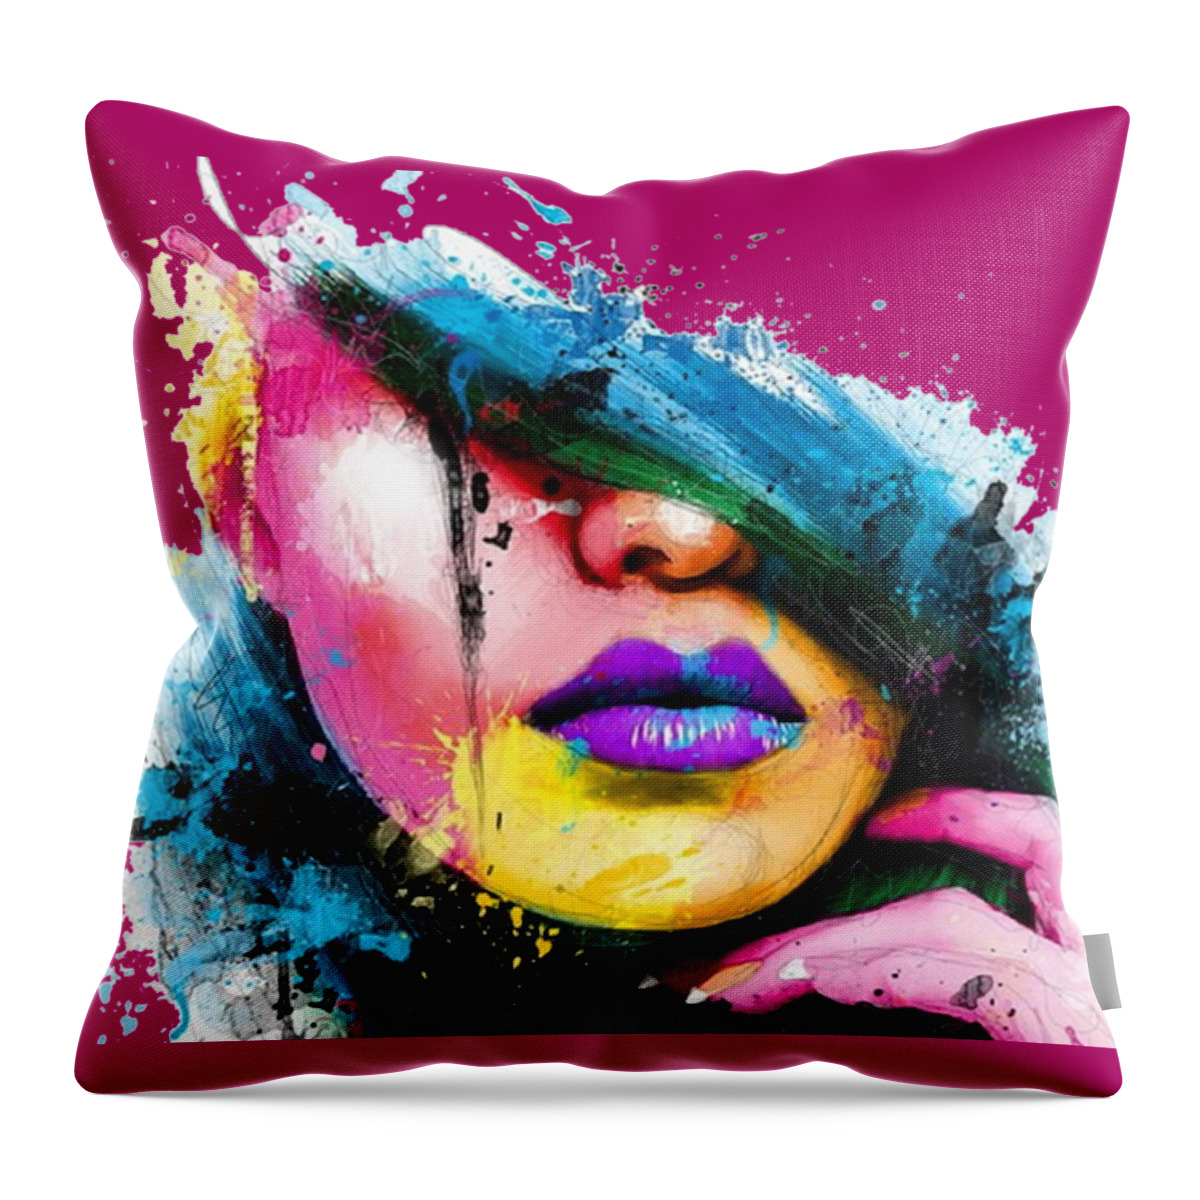 Faces Throw Pillow featuring the painting Adonis T-shirt by Herb Strobino